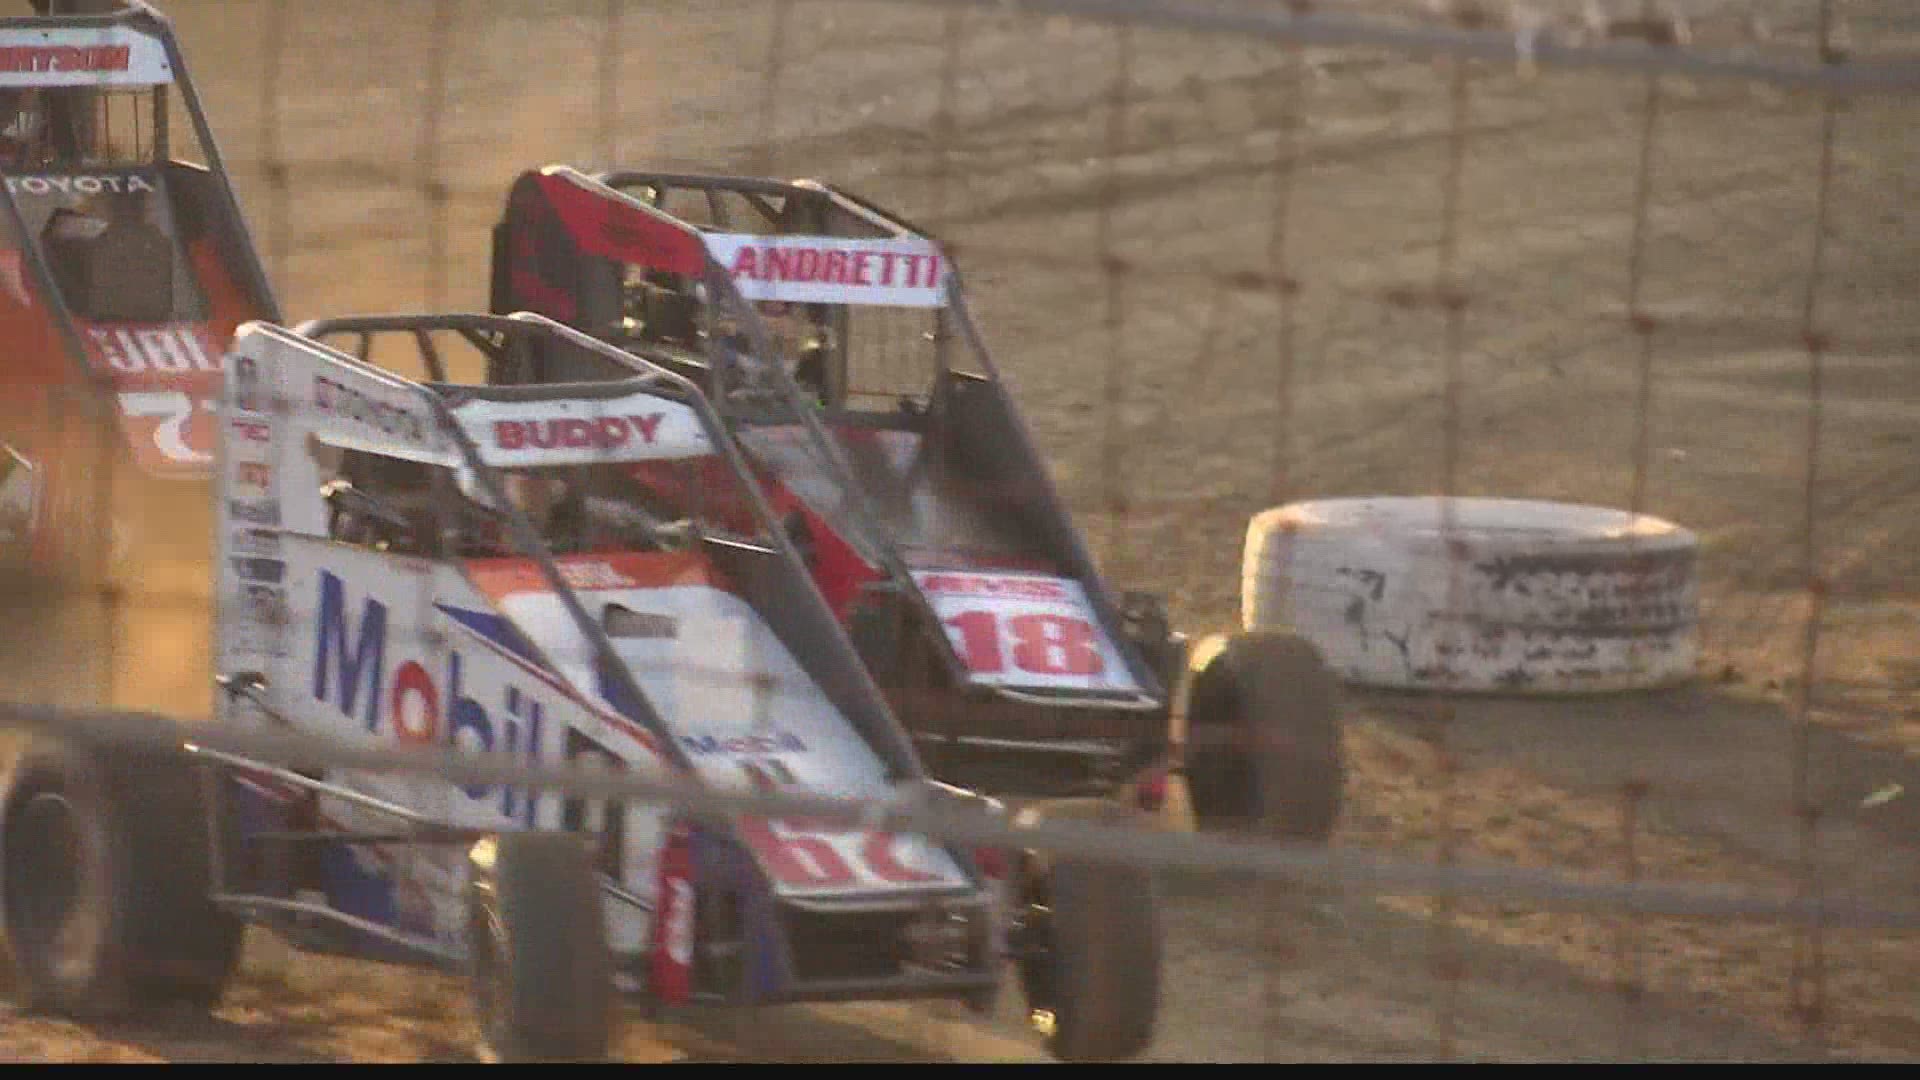 Racers took the track at Circle City Raceway Wednesday in honor of the late John Andretti.